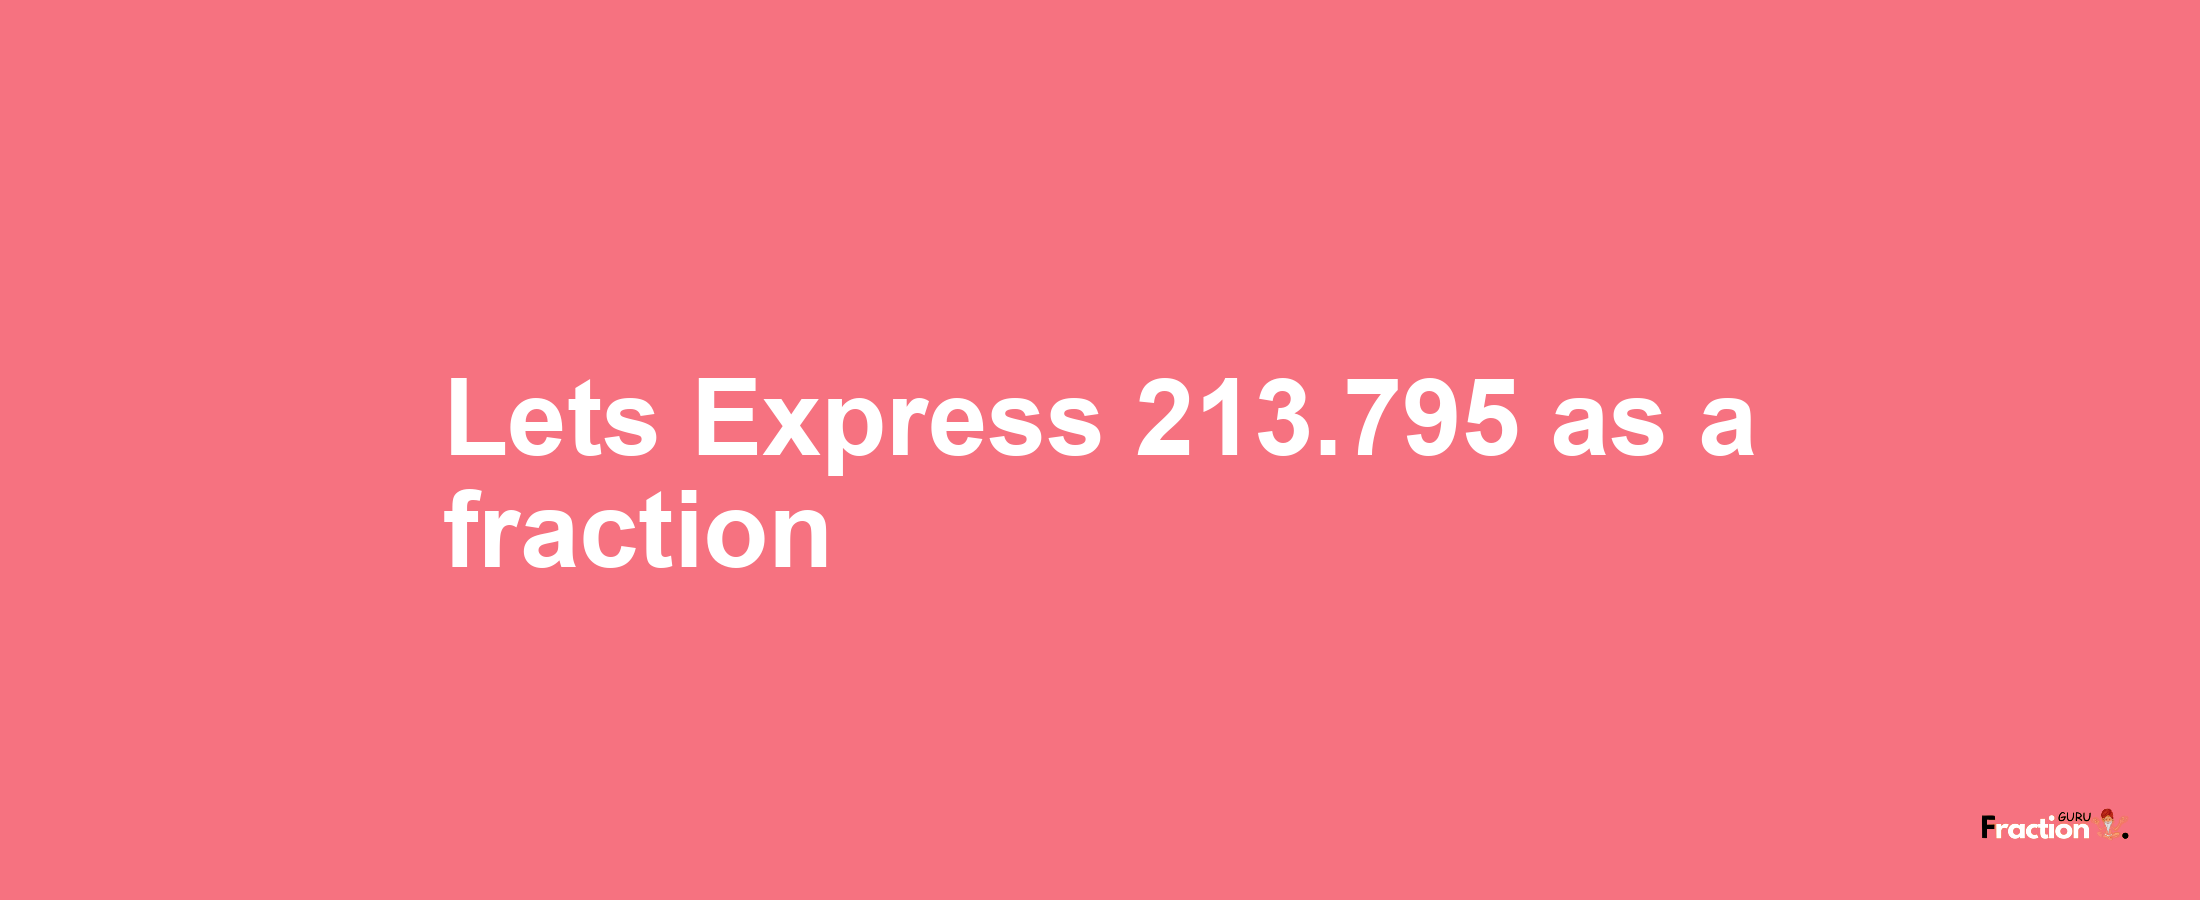 Lets Express 213.795 as afraction